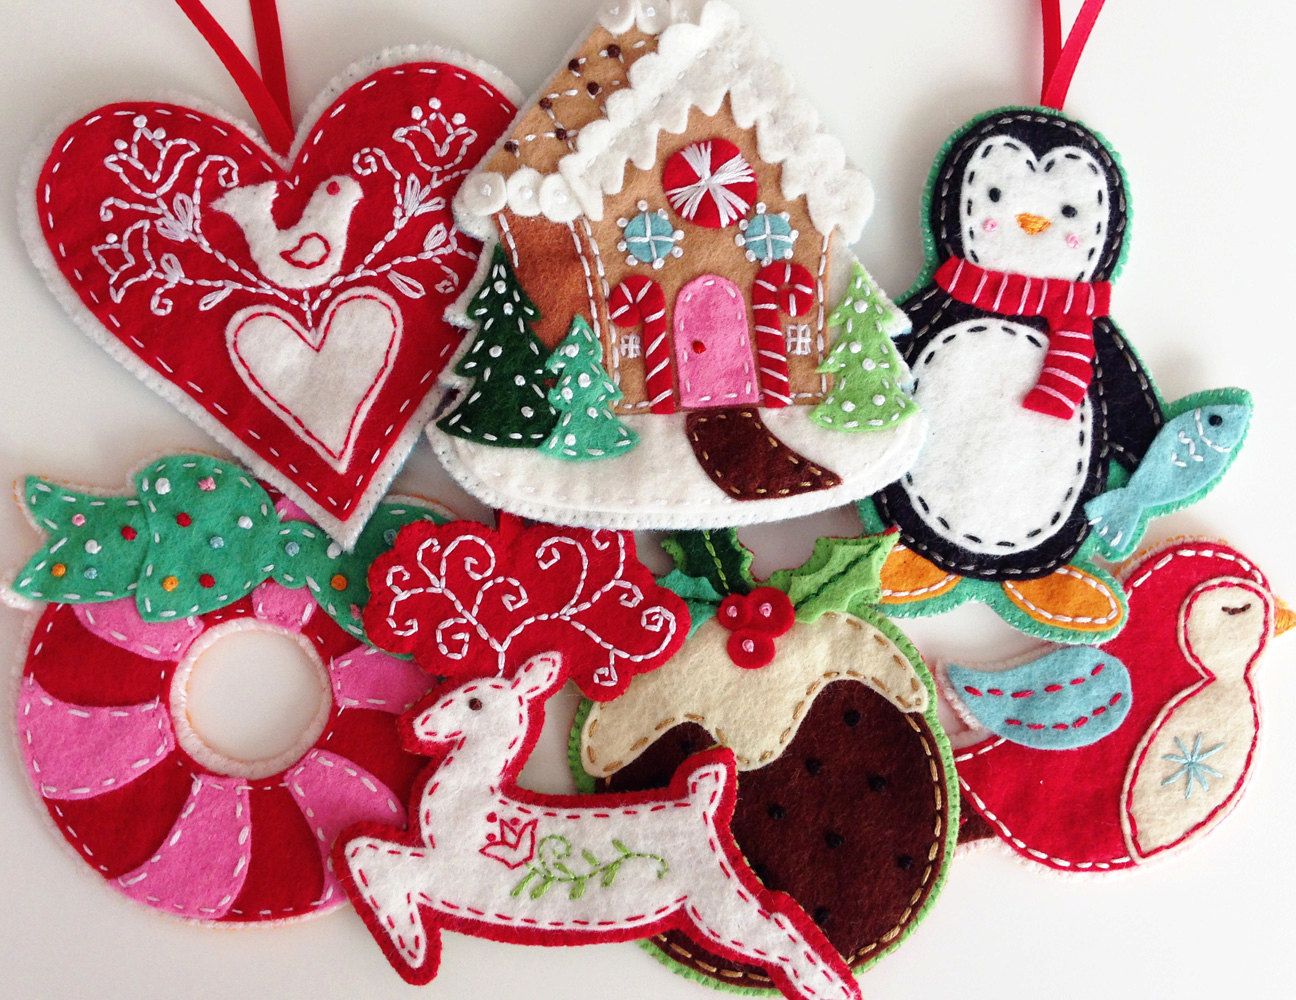 DIY Holiday gifts: Hand-stitched Christmas ornaments | Downloadable pattern book from Erica Hite on ETsy